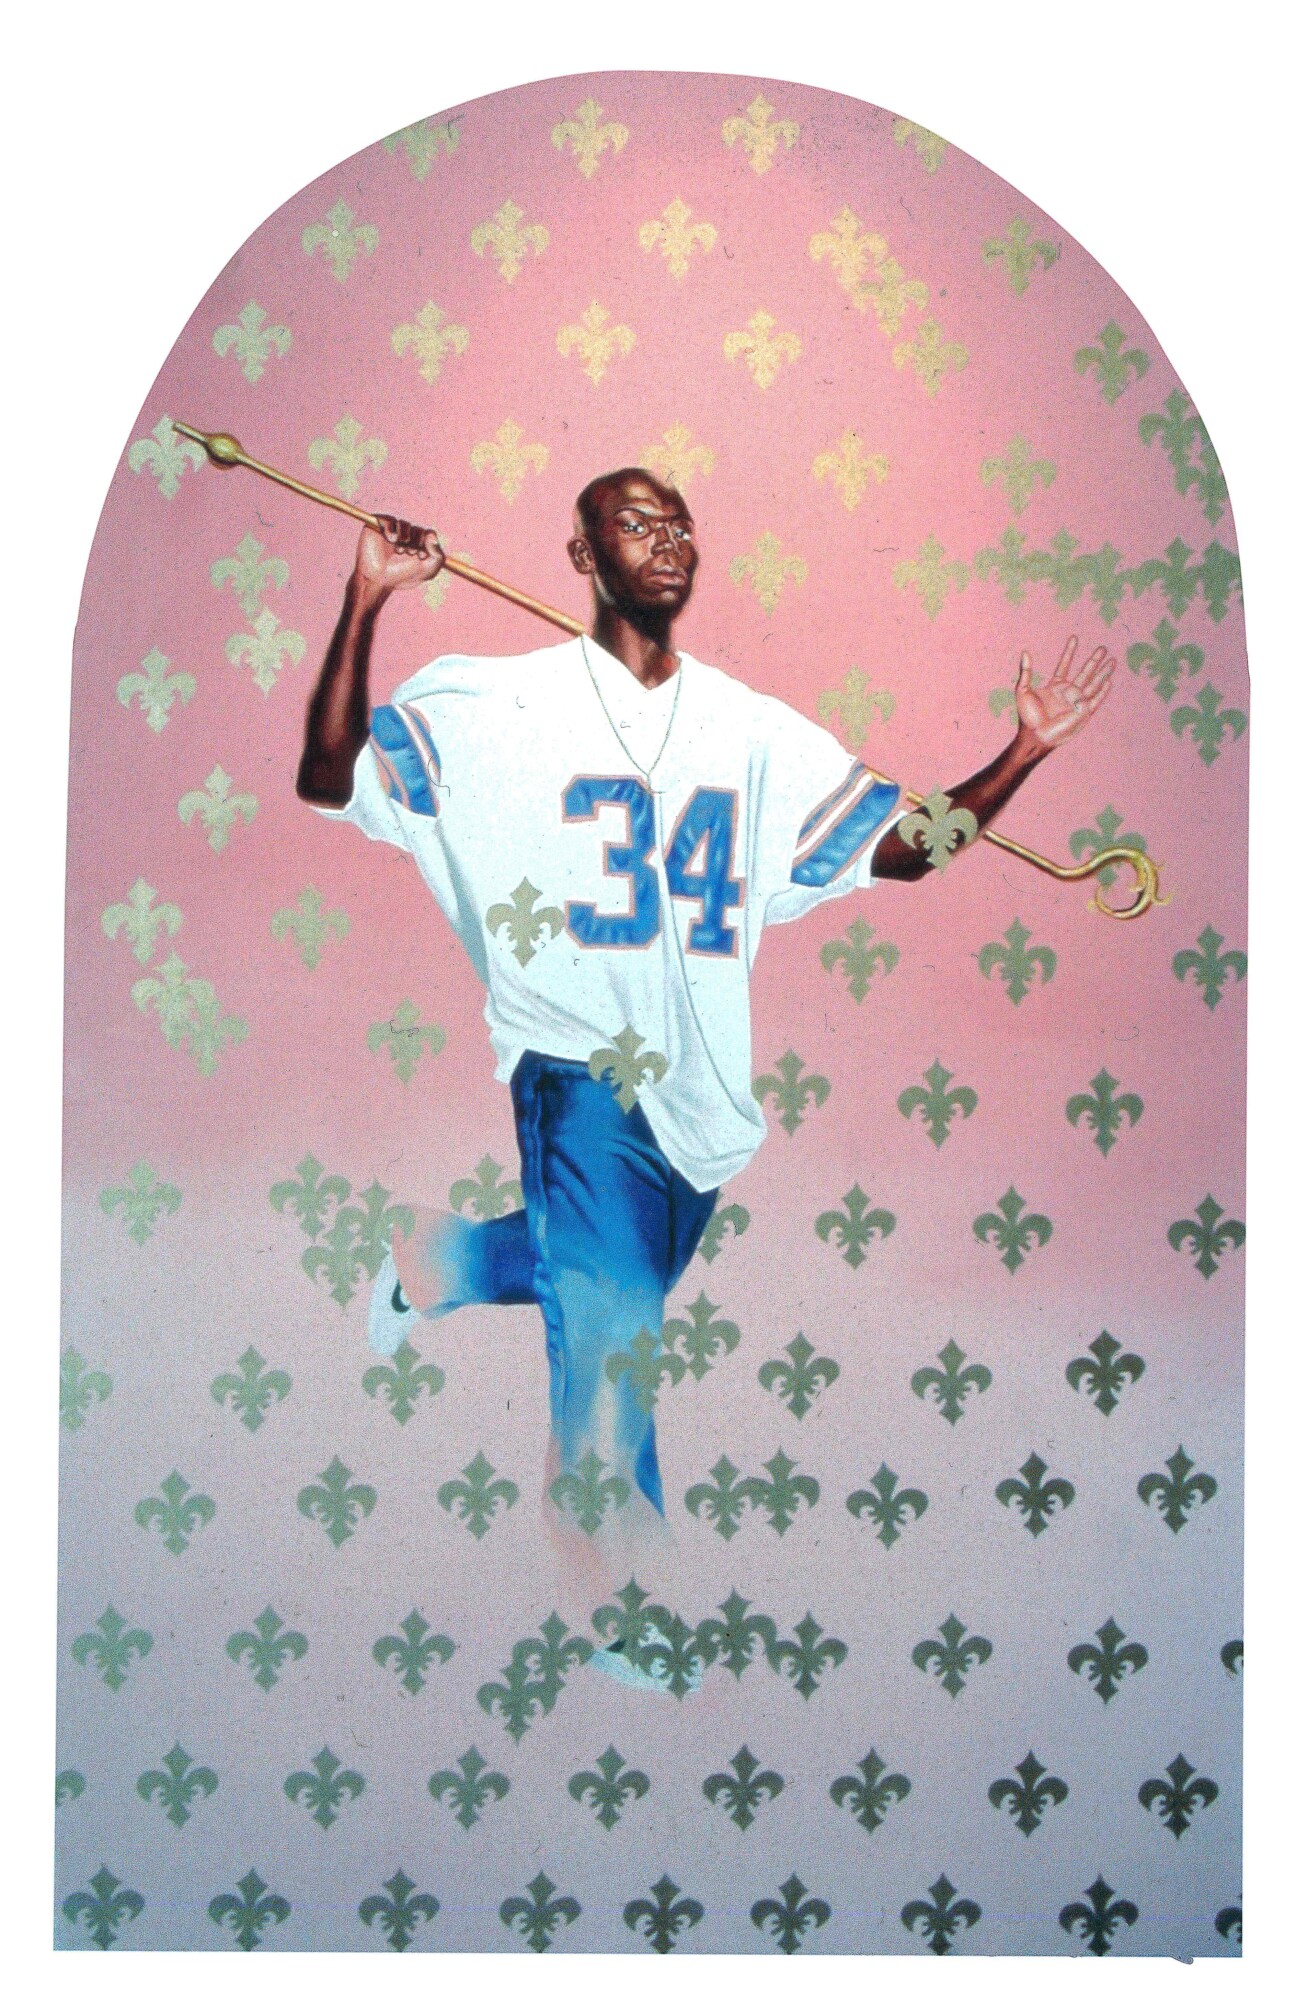 kehindewiley_passing:posing_passing : posing_(decoration_of_the_chapel_of_the_sacrament_in_the_Cathedral_of_udine,_resurrection)